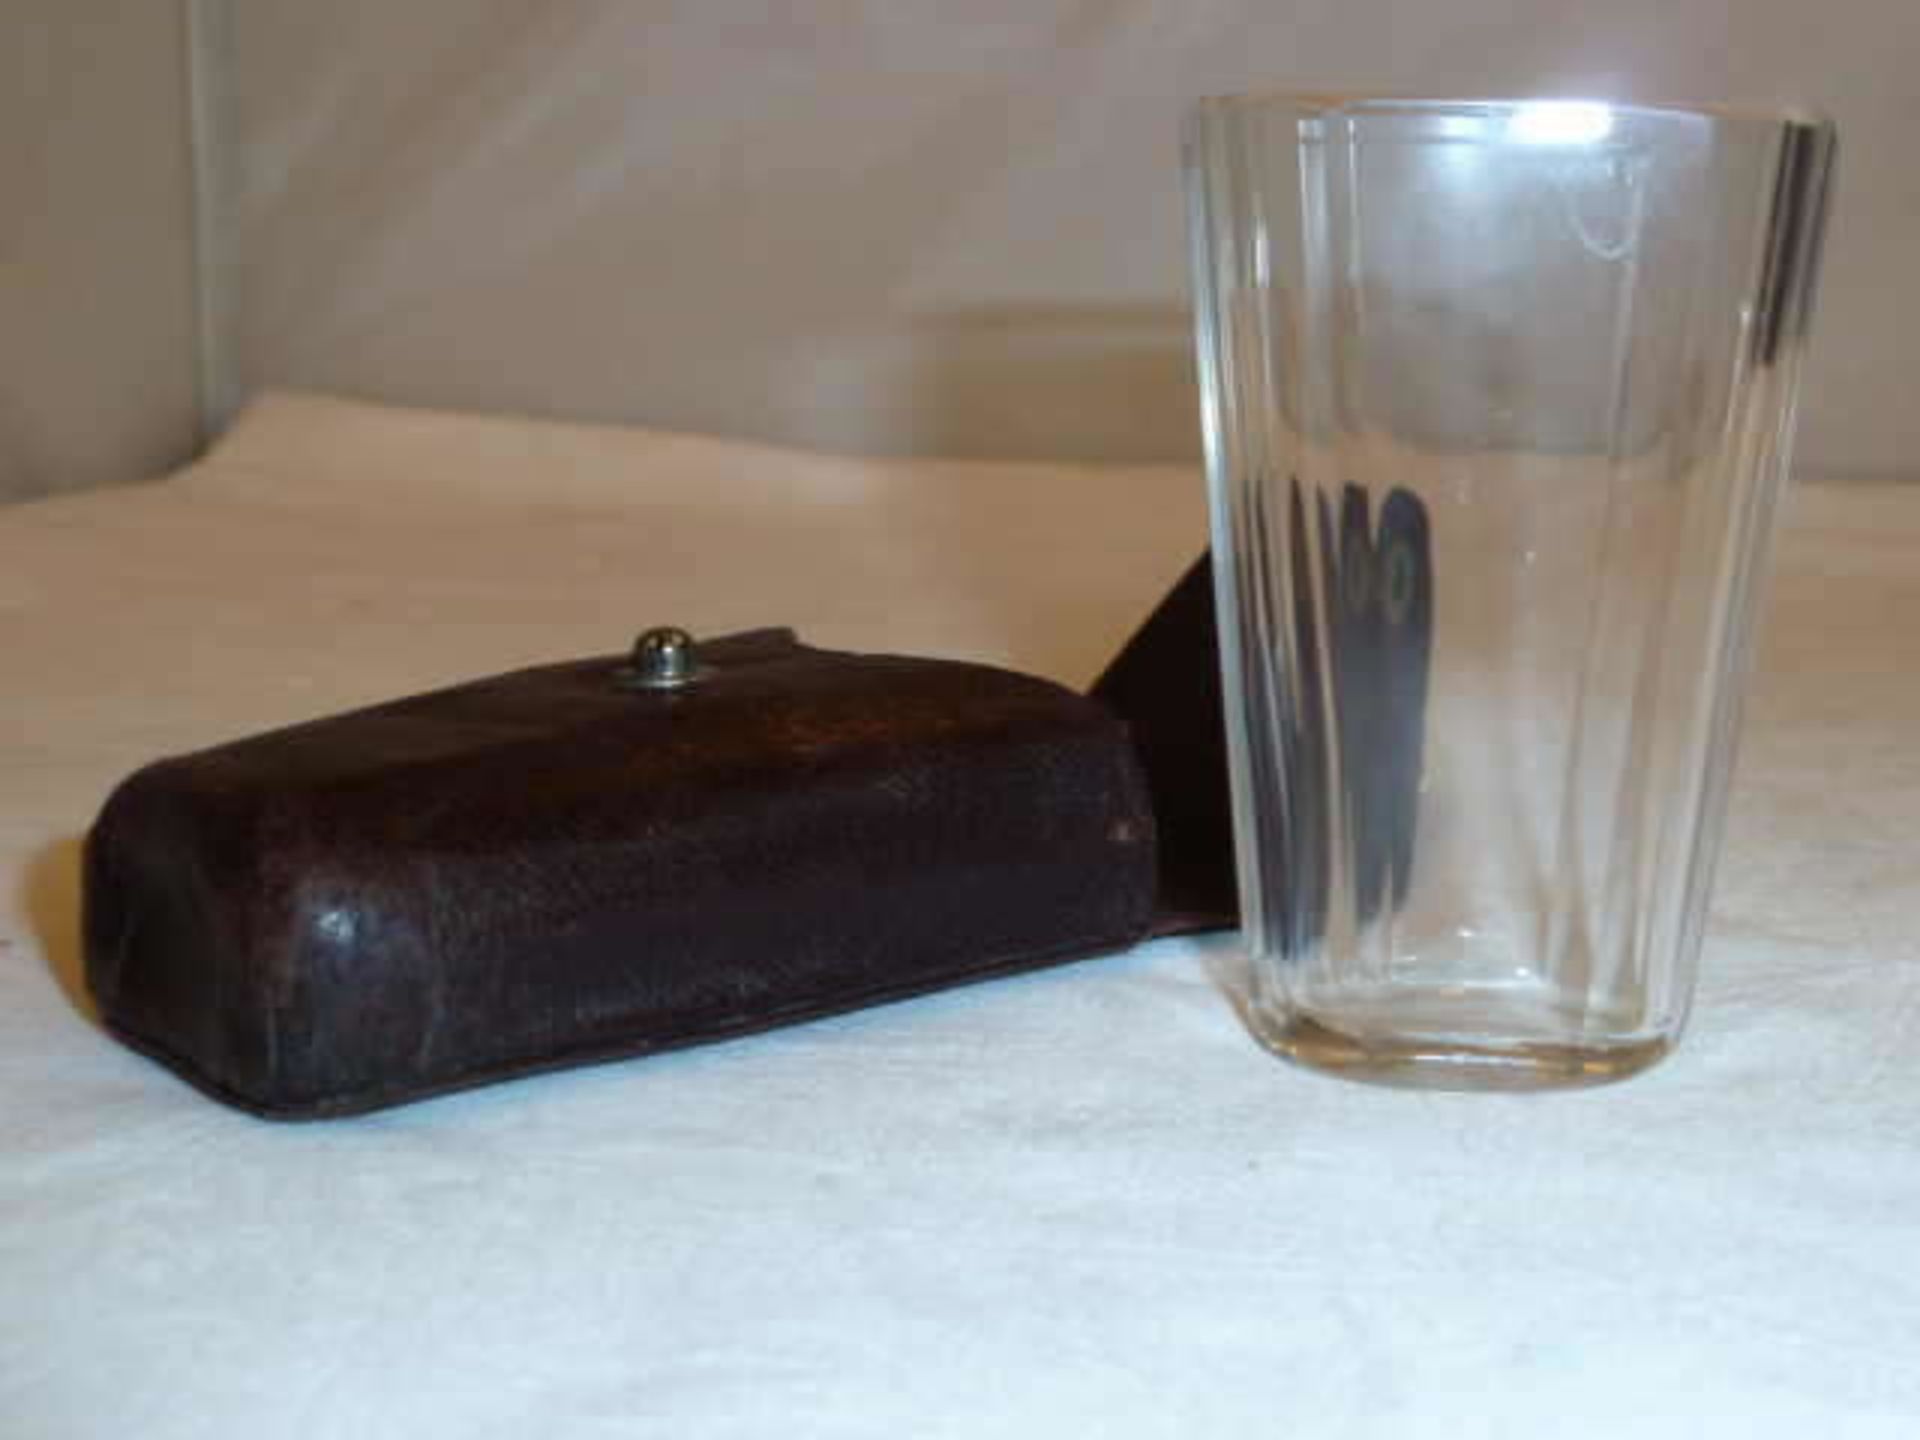 1 Biedermair drinking glass in leather case. Very good condition, height c.a 8,5cm